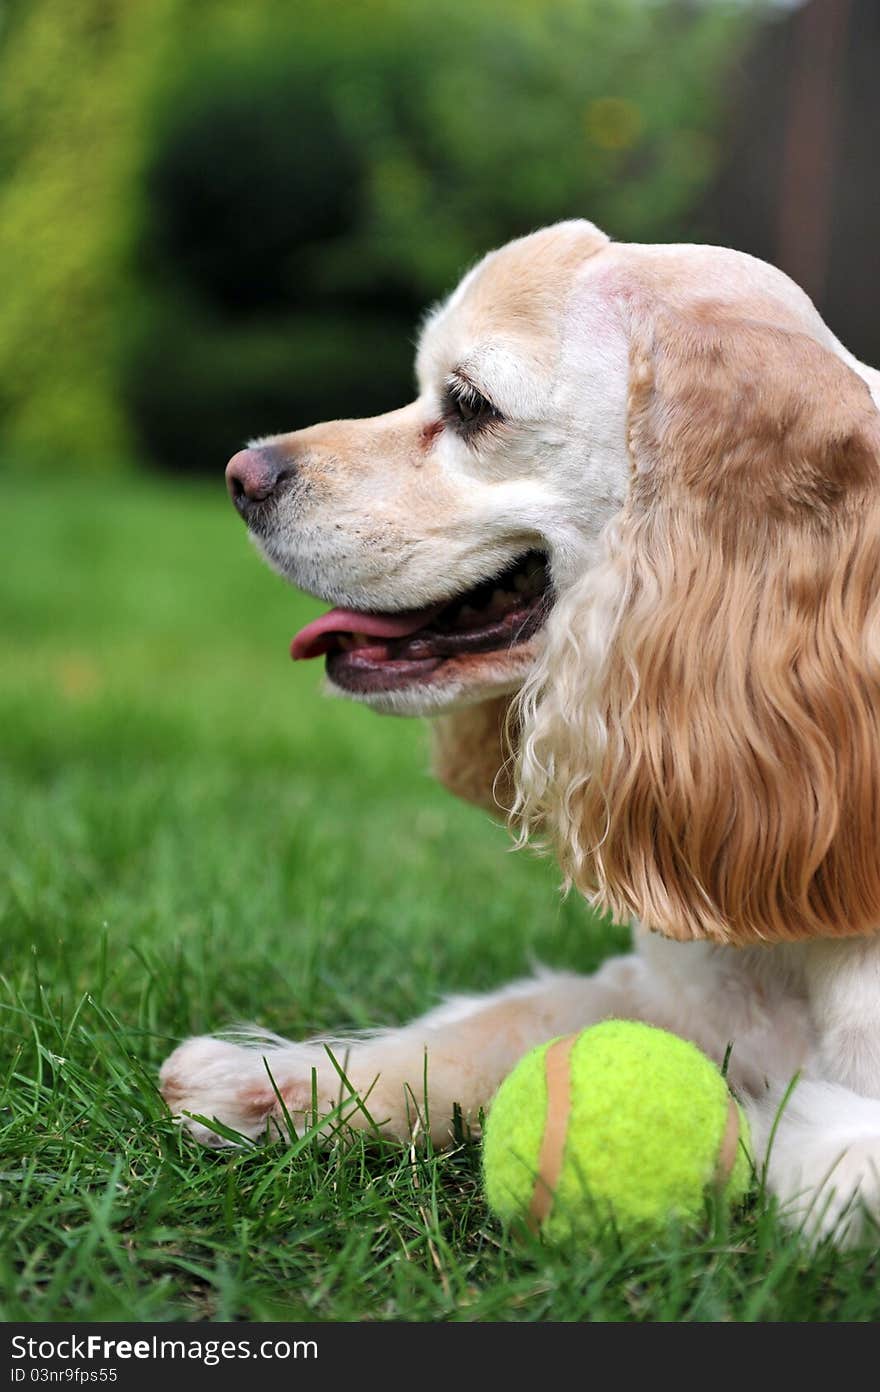 Dog sitting on grass - with tenis ball